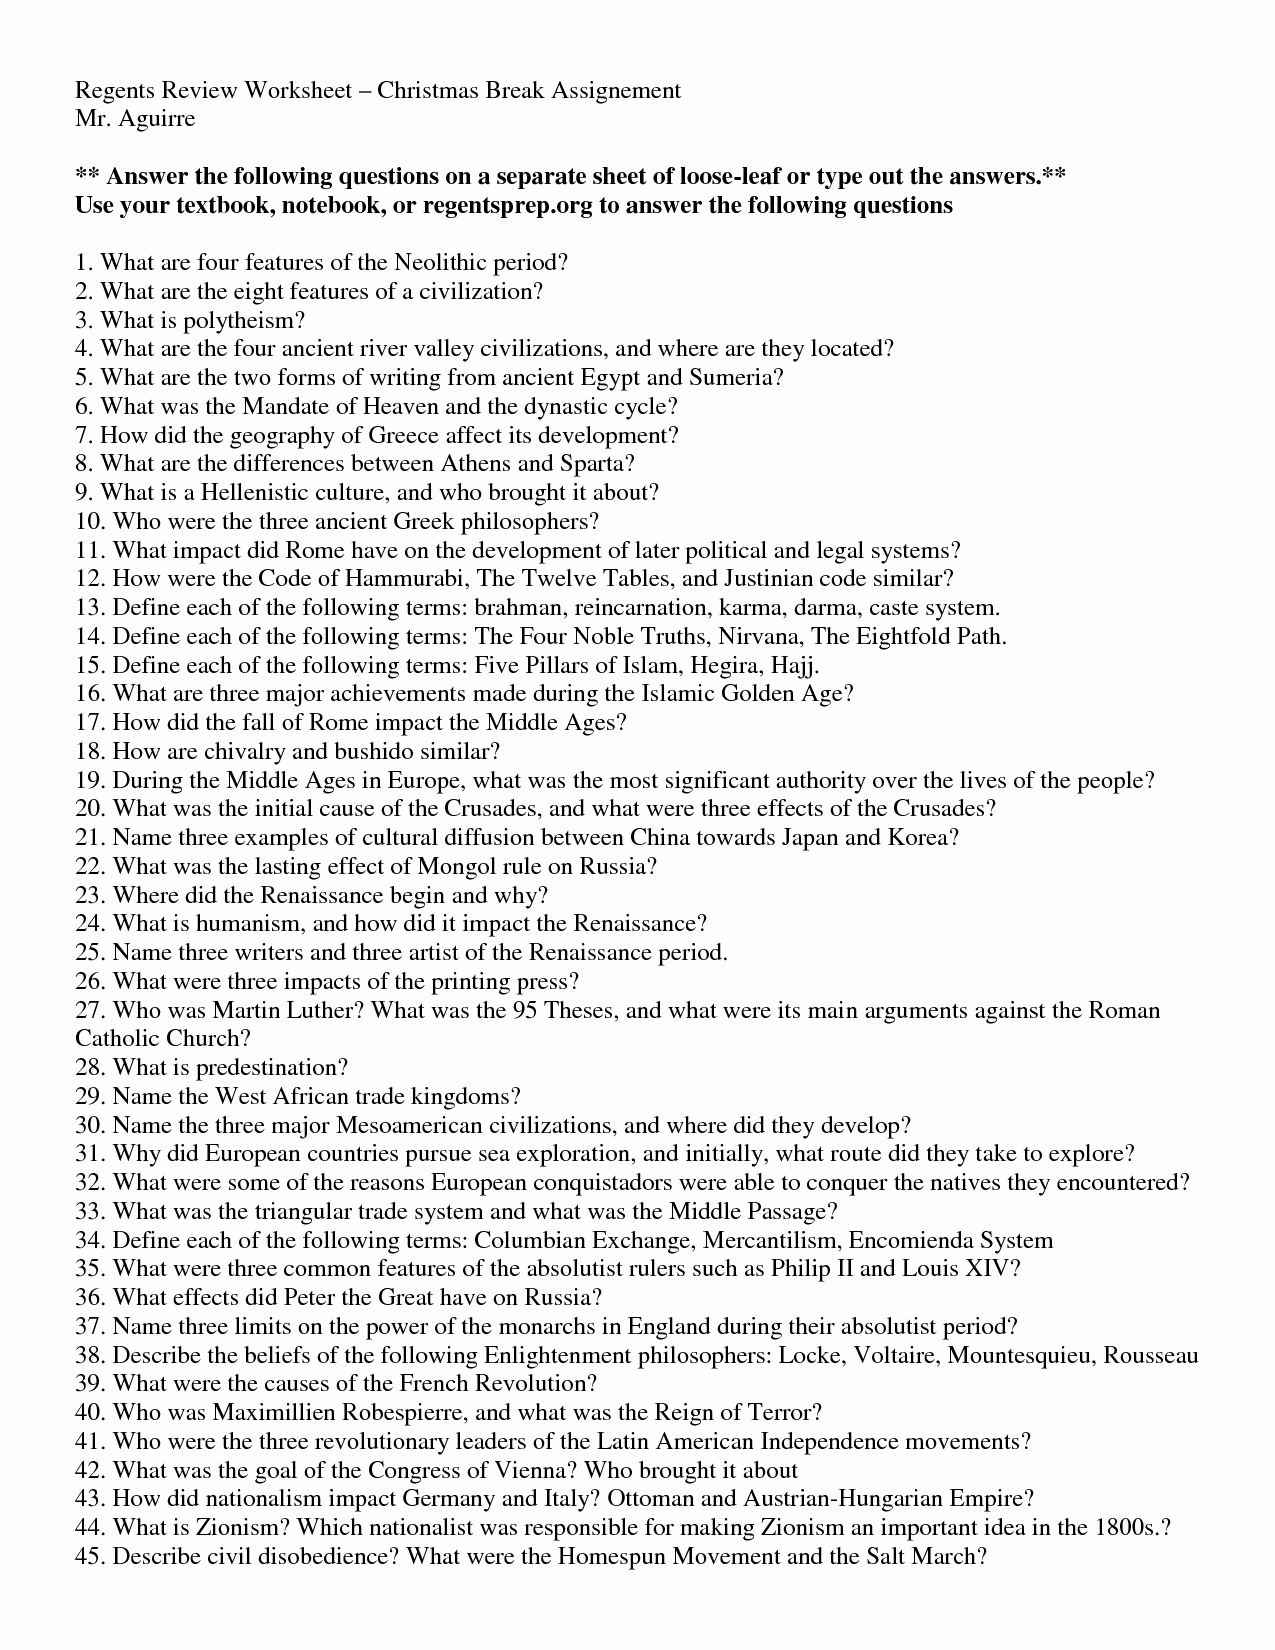 River Valley Civilizations Worksheet Answers Inspirational 12 Best Of Breaking the Code Worksheet Answers